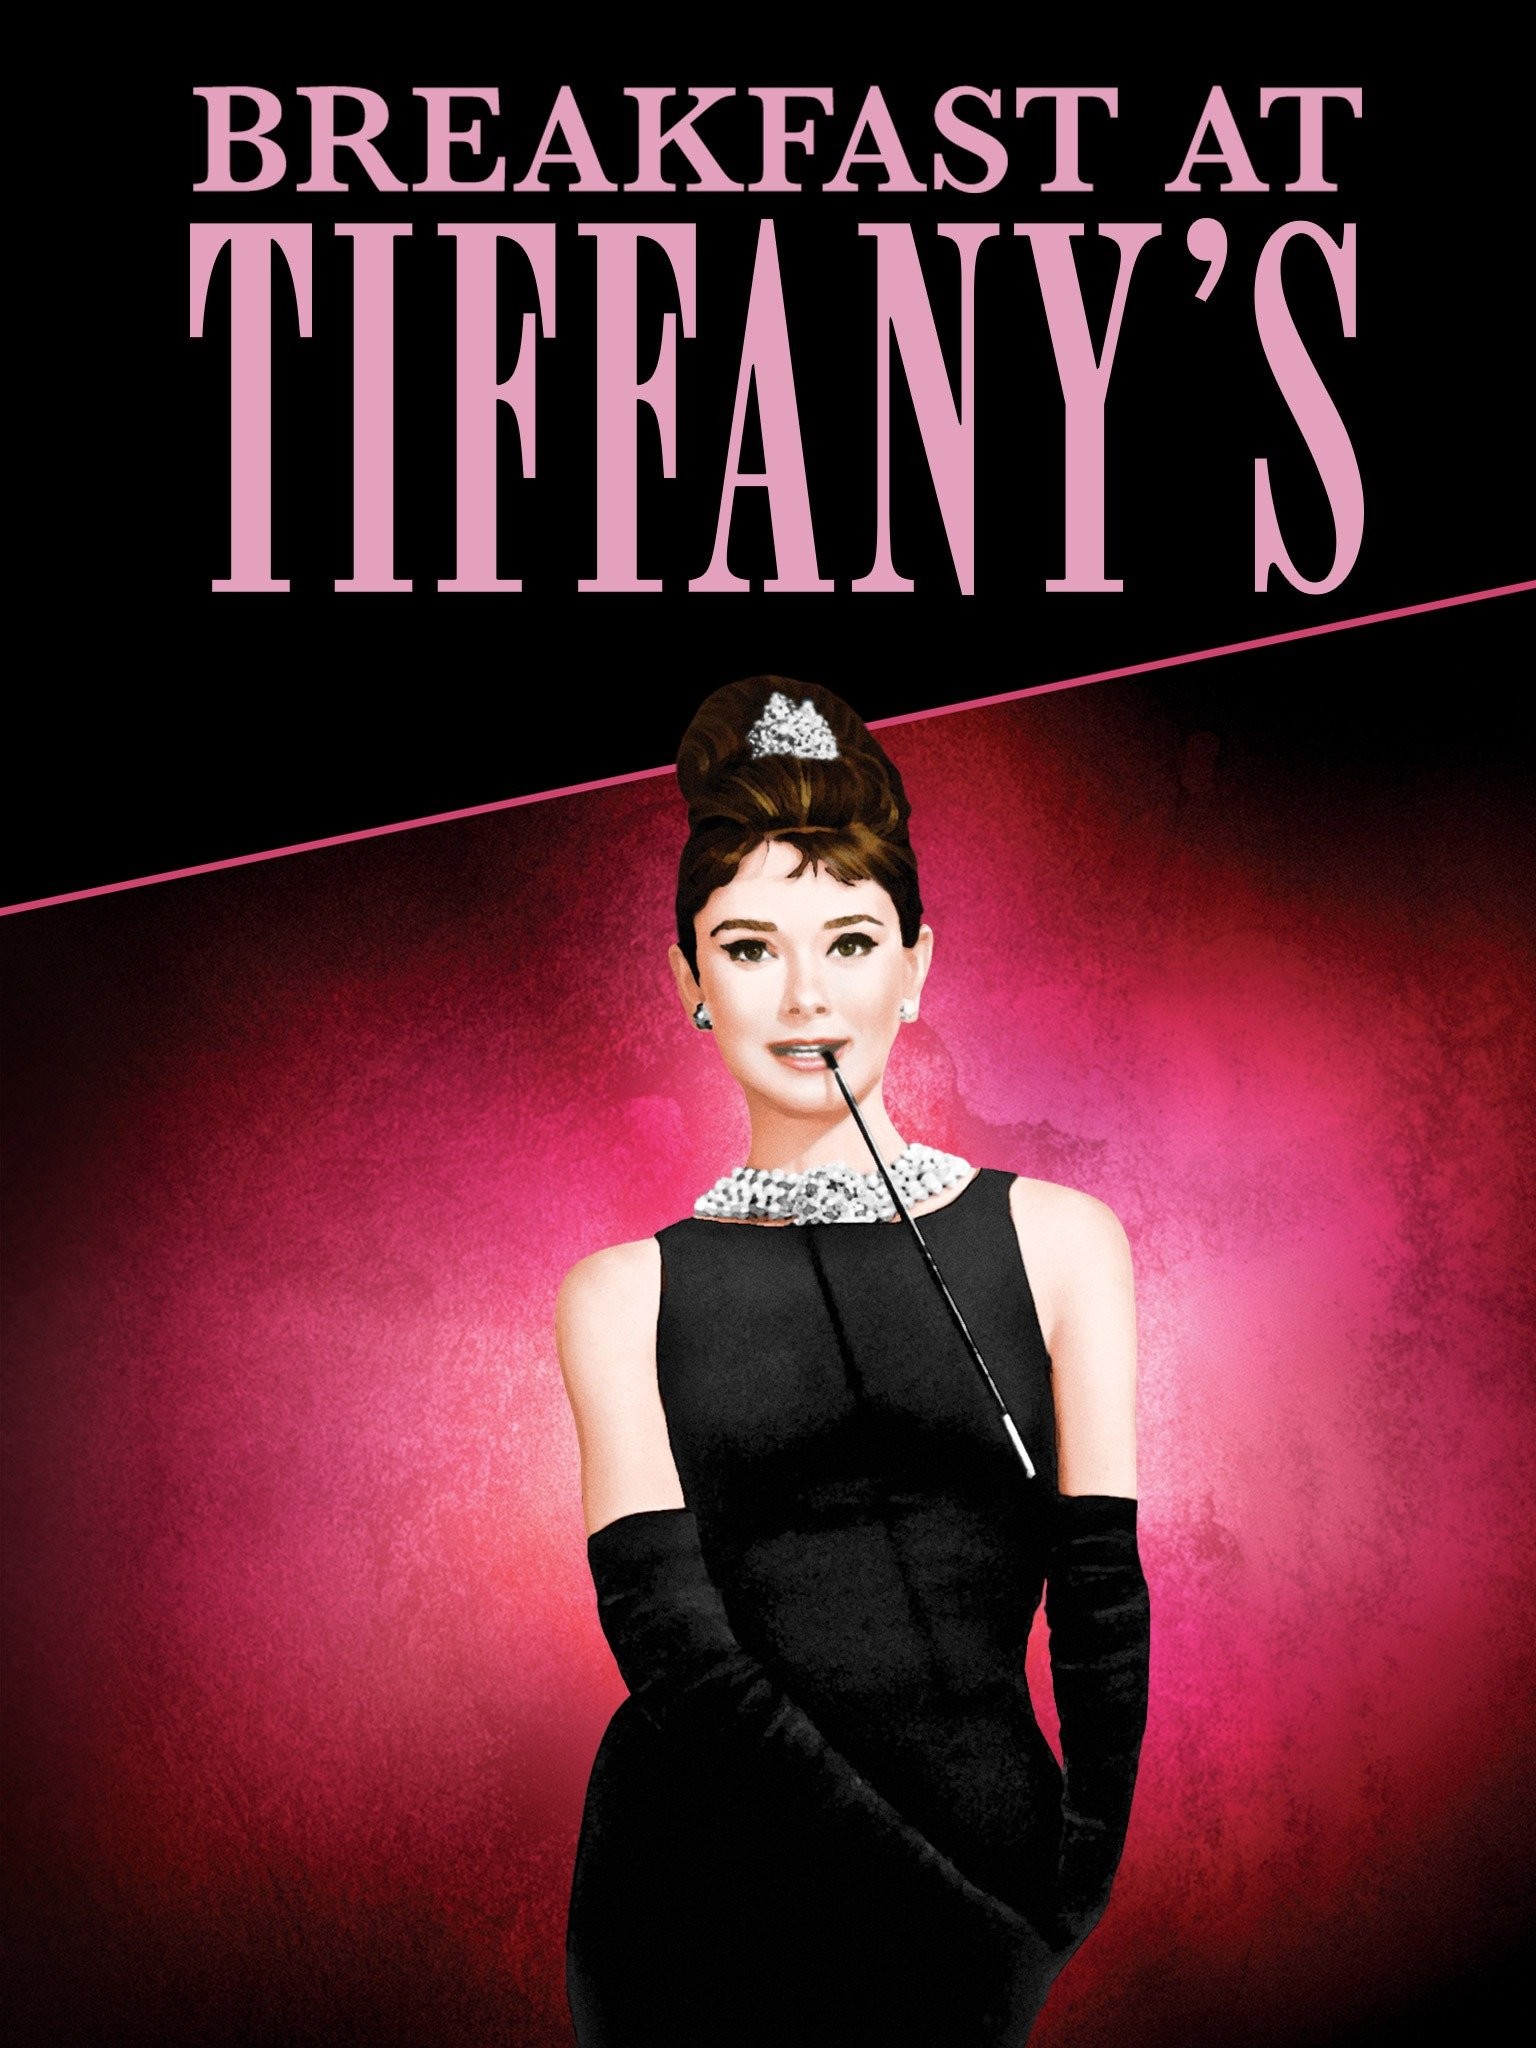 How to get a Reservation for Breakfast at Tiffany's